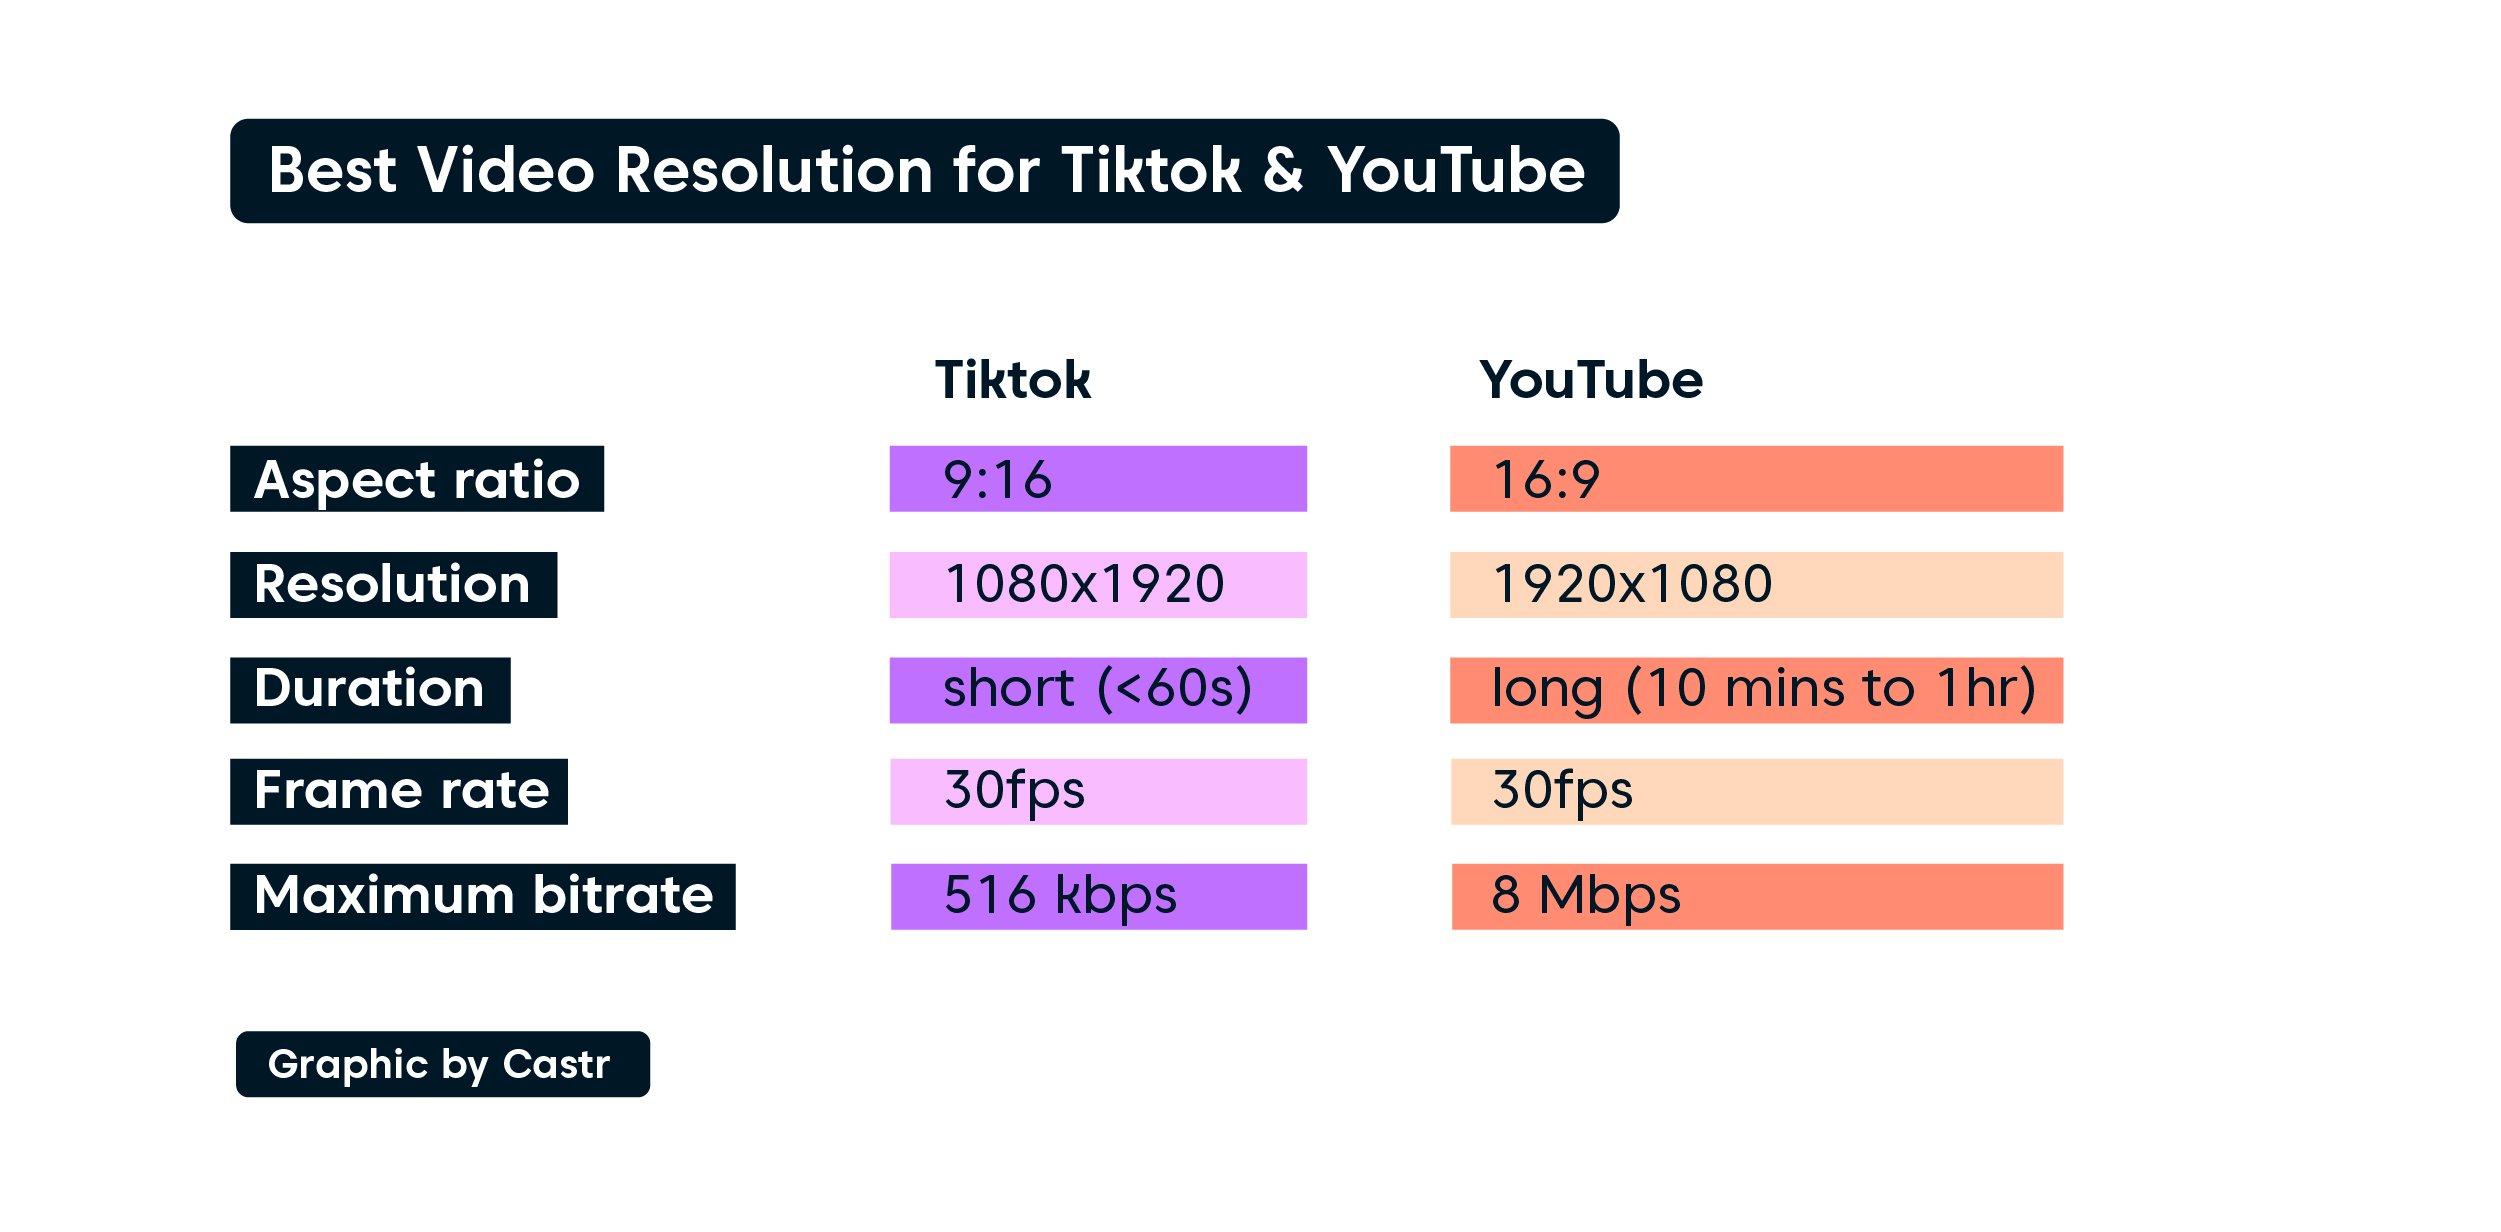 Best Video Resolution for Tiktok and YouTube